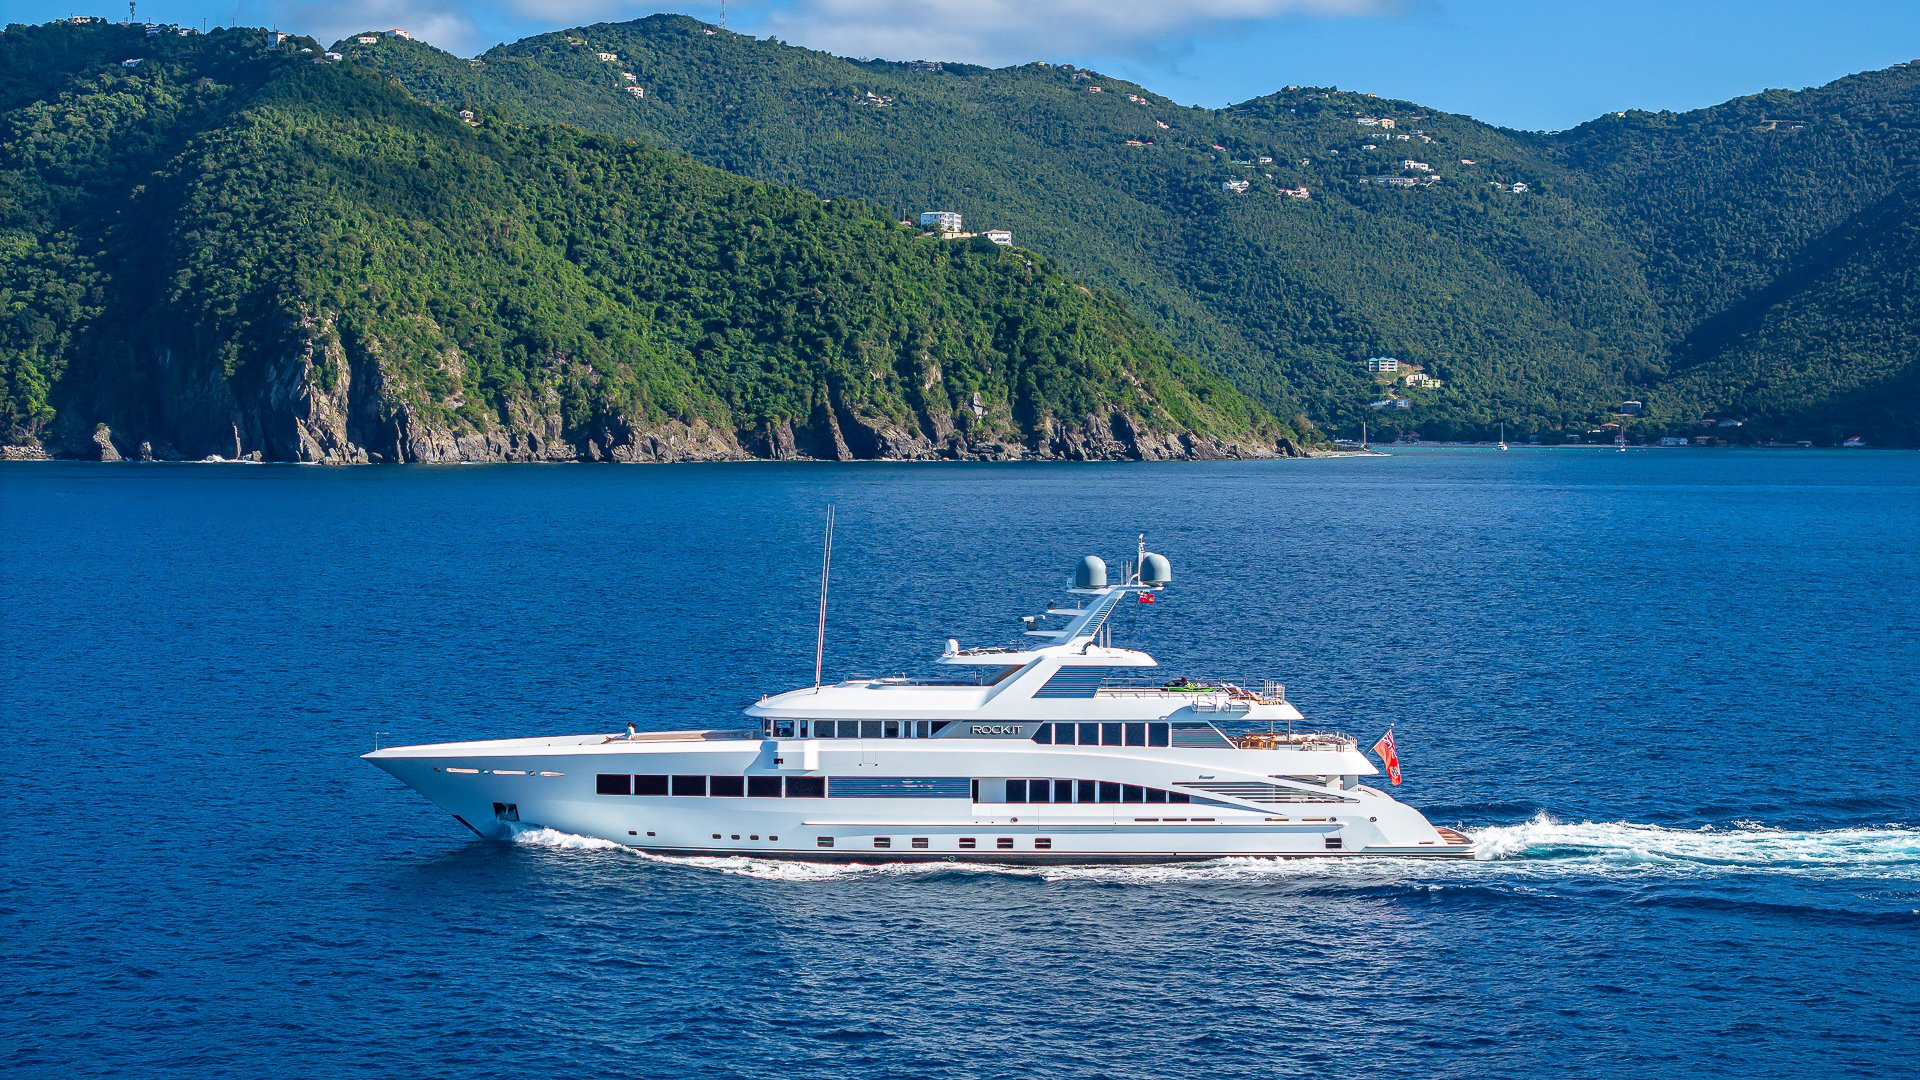 Rock It Yacht Running In The Virgin Islands Credit Yachting Image